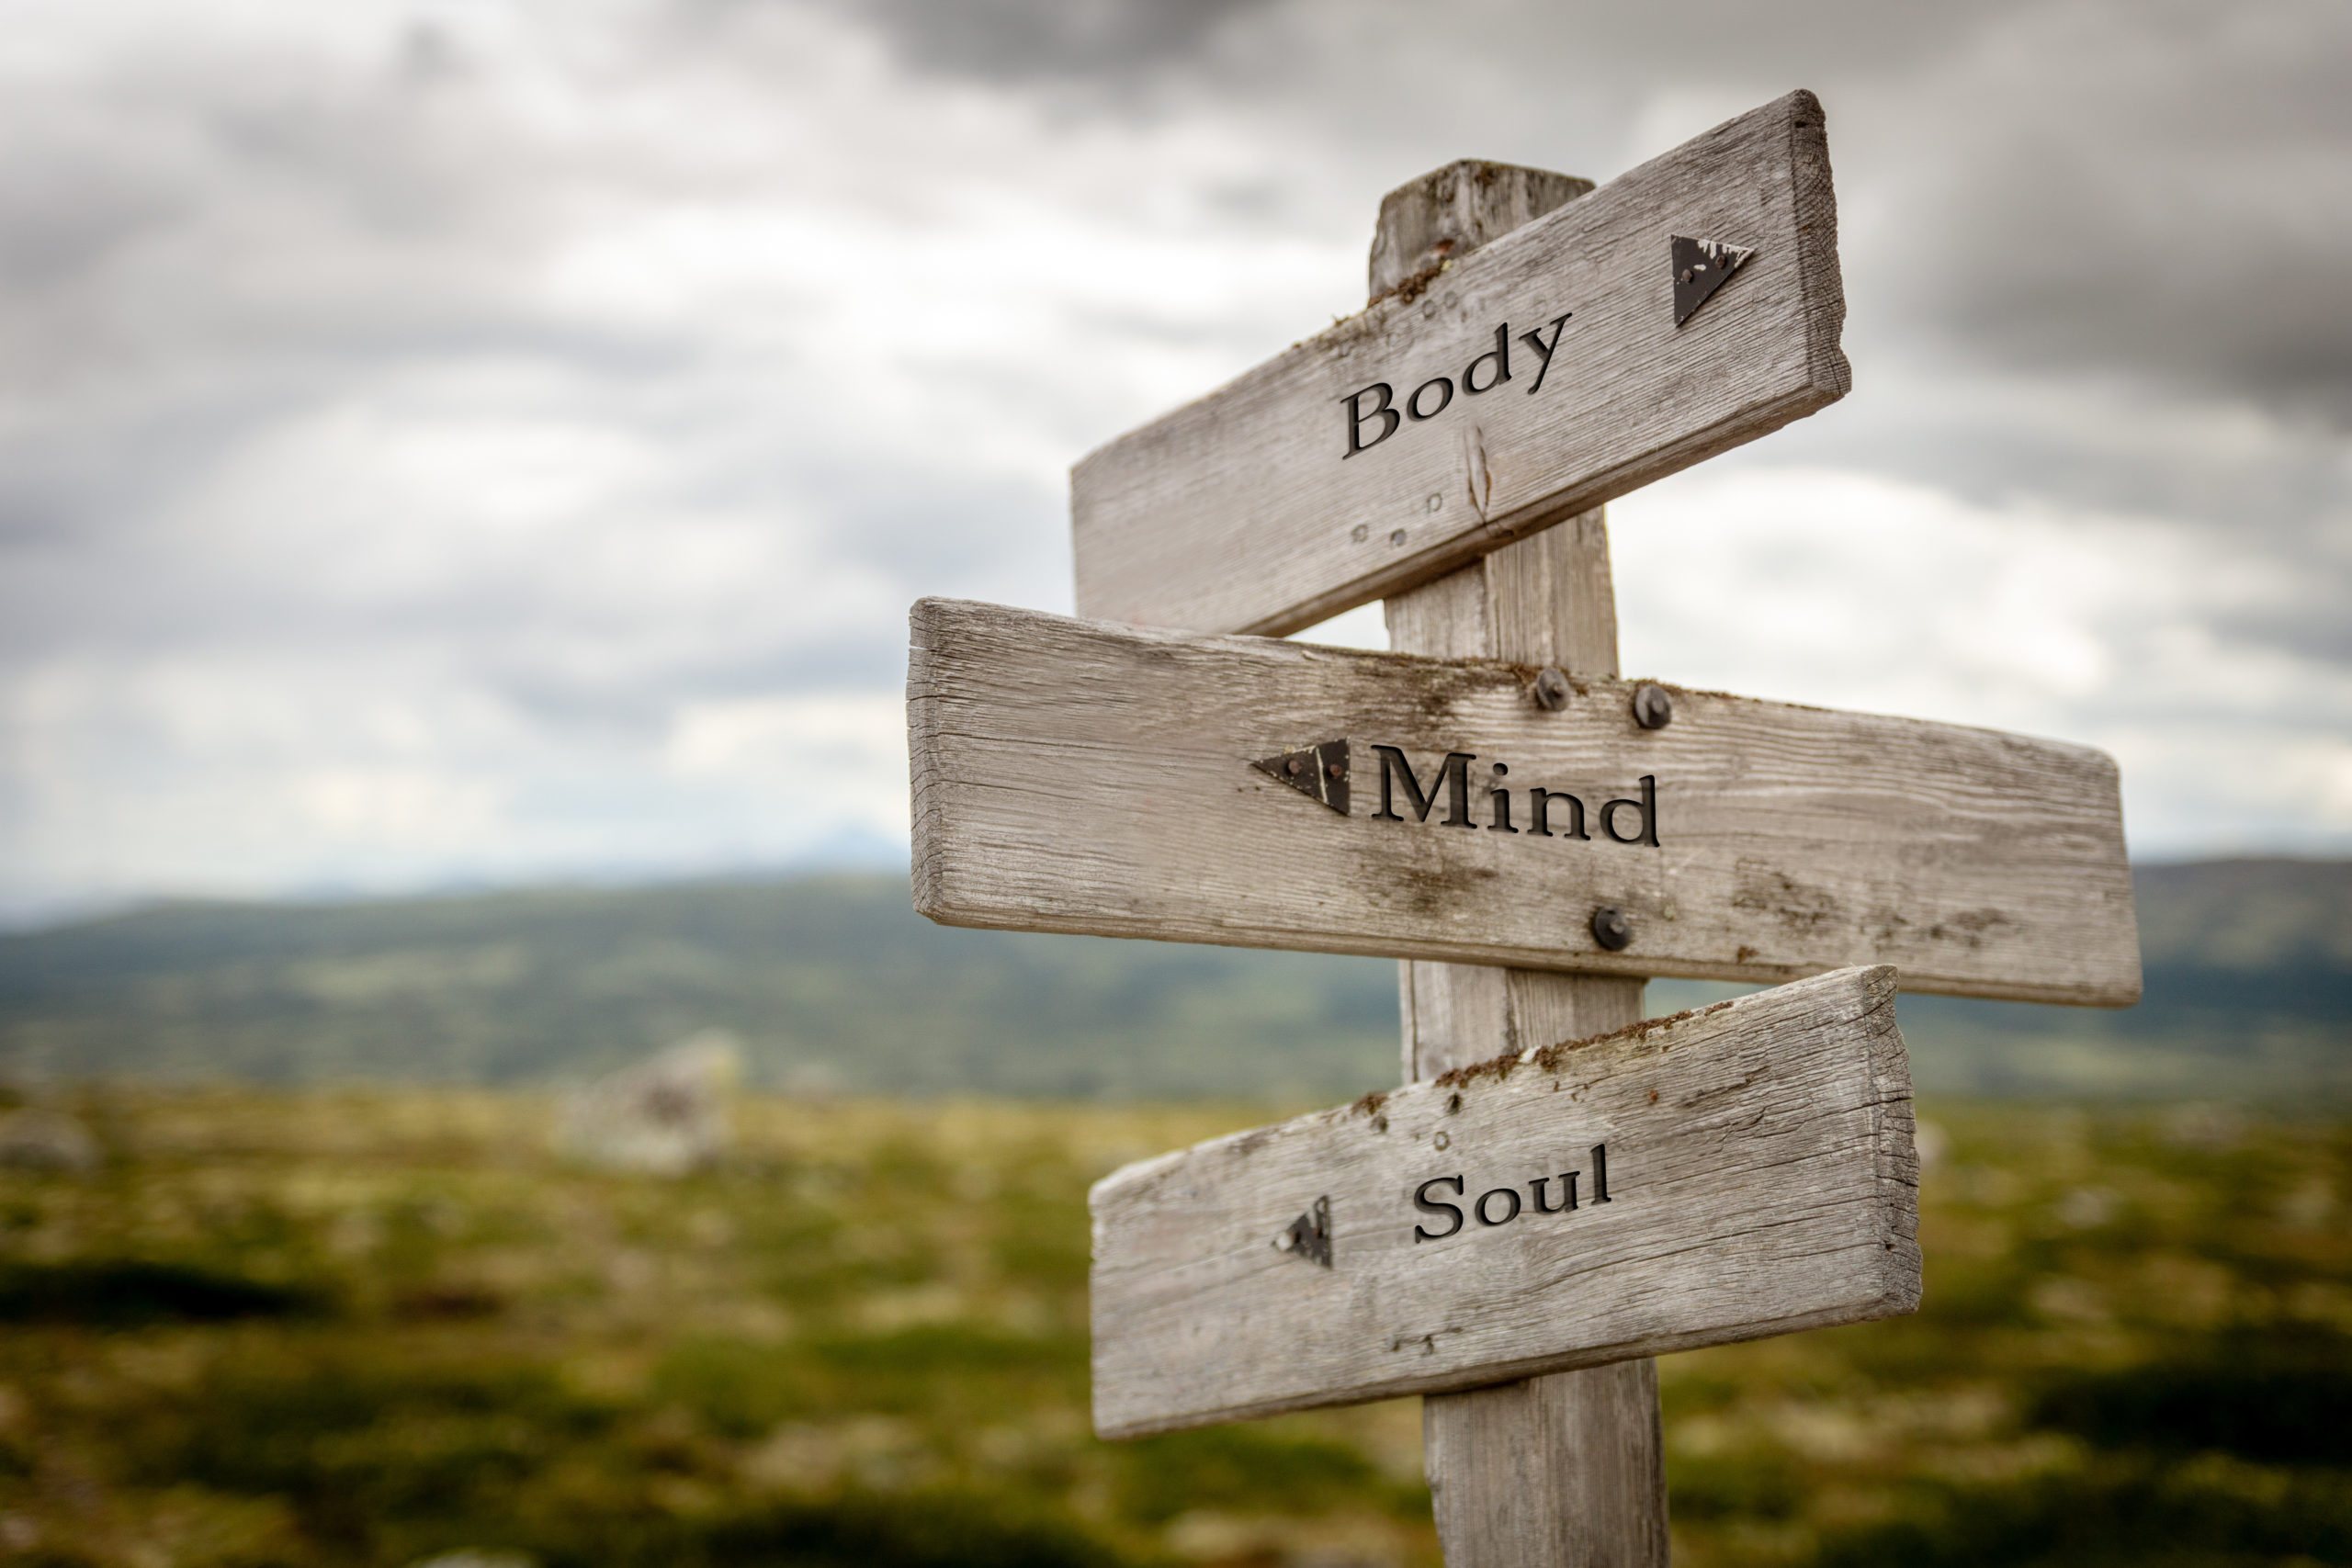 body mind soul text engraved on old wooden signpost outdoors in